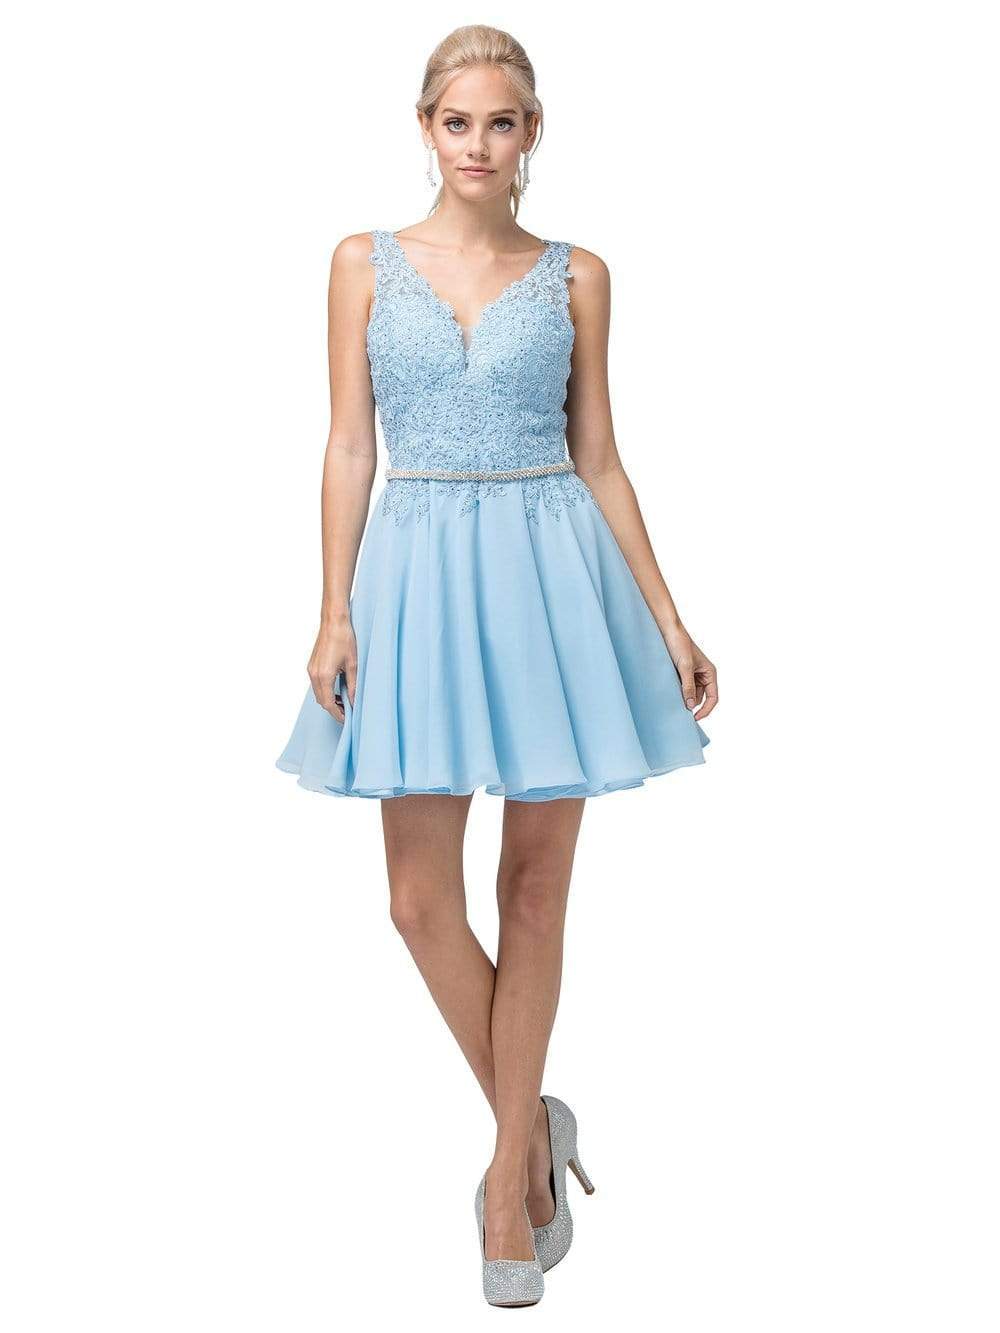 Dancing Queen - 3011 Plunging V-Neck Lace Bodice Homecoming Dress
